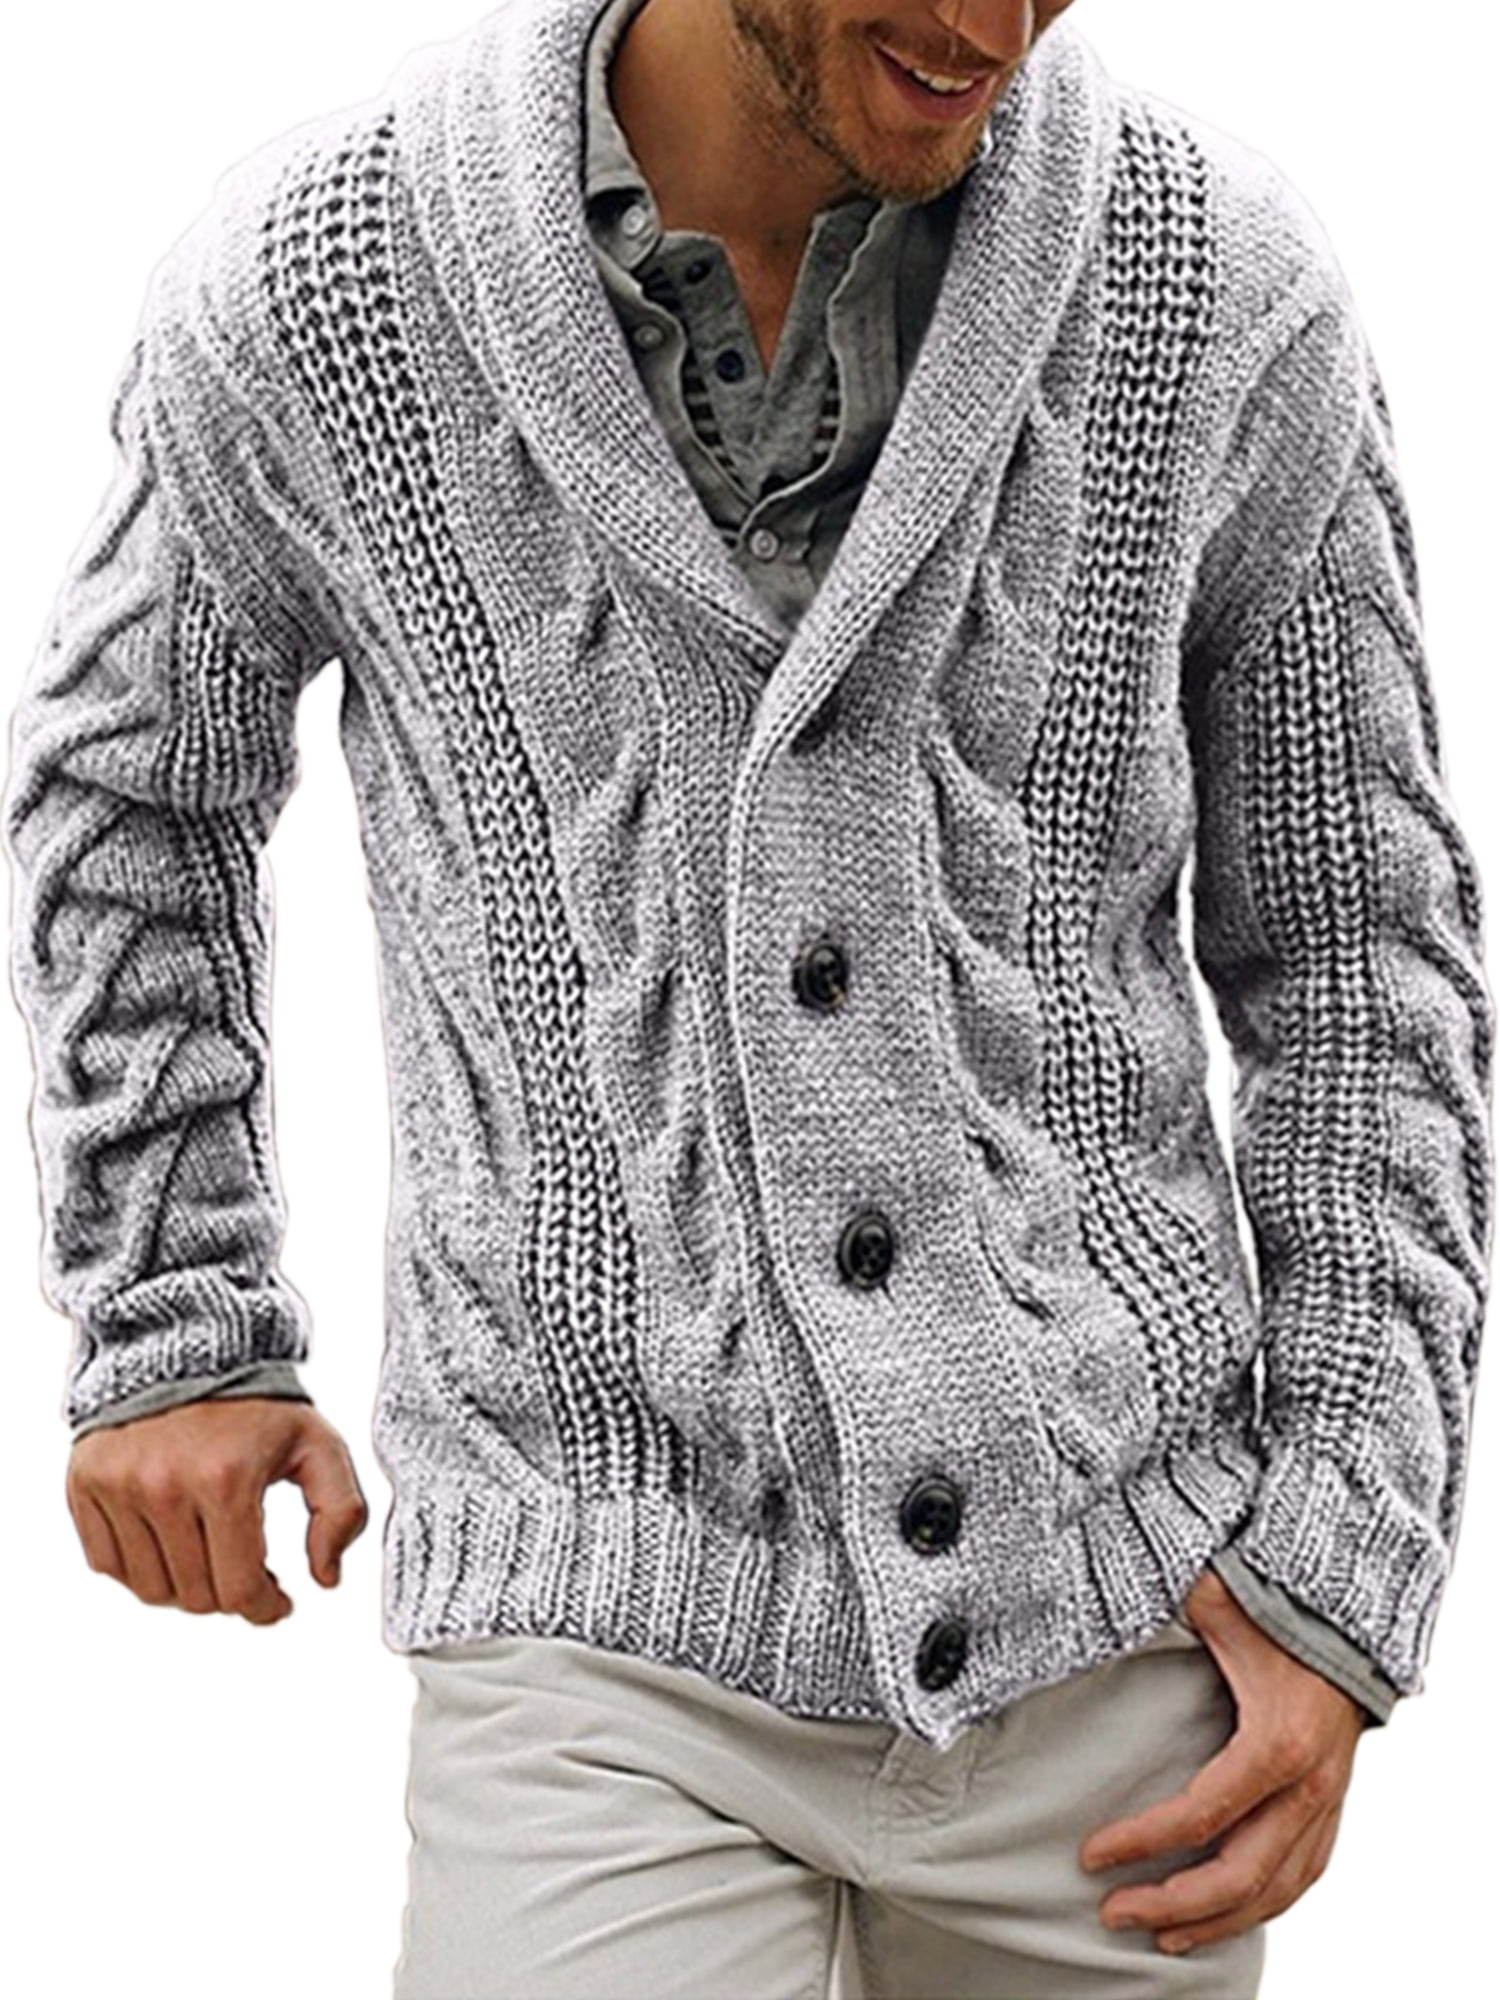 Cute and casual knit buttoned hooded cardigan top Sweater Long sleeve And collar design